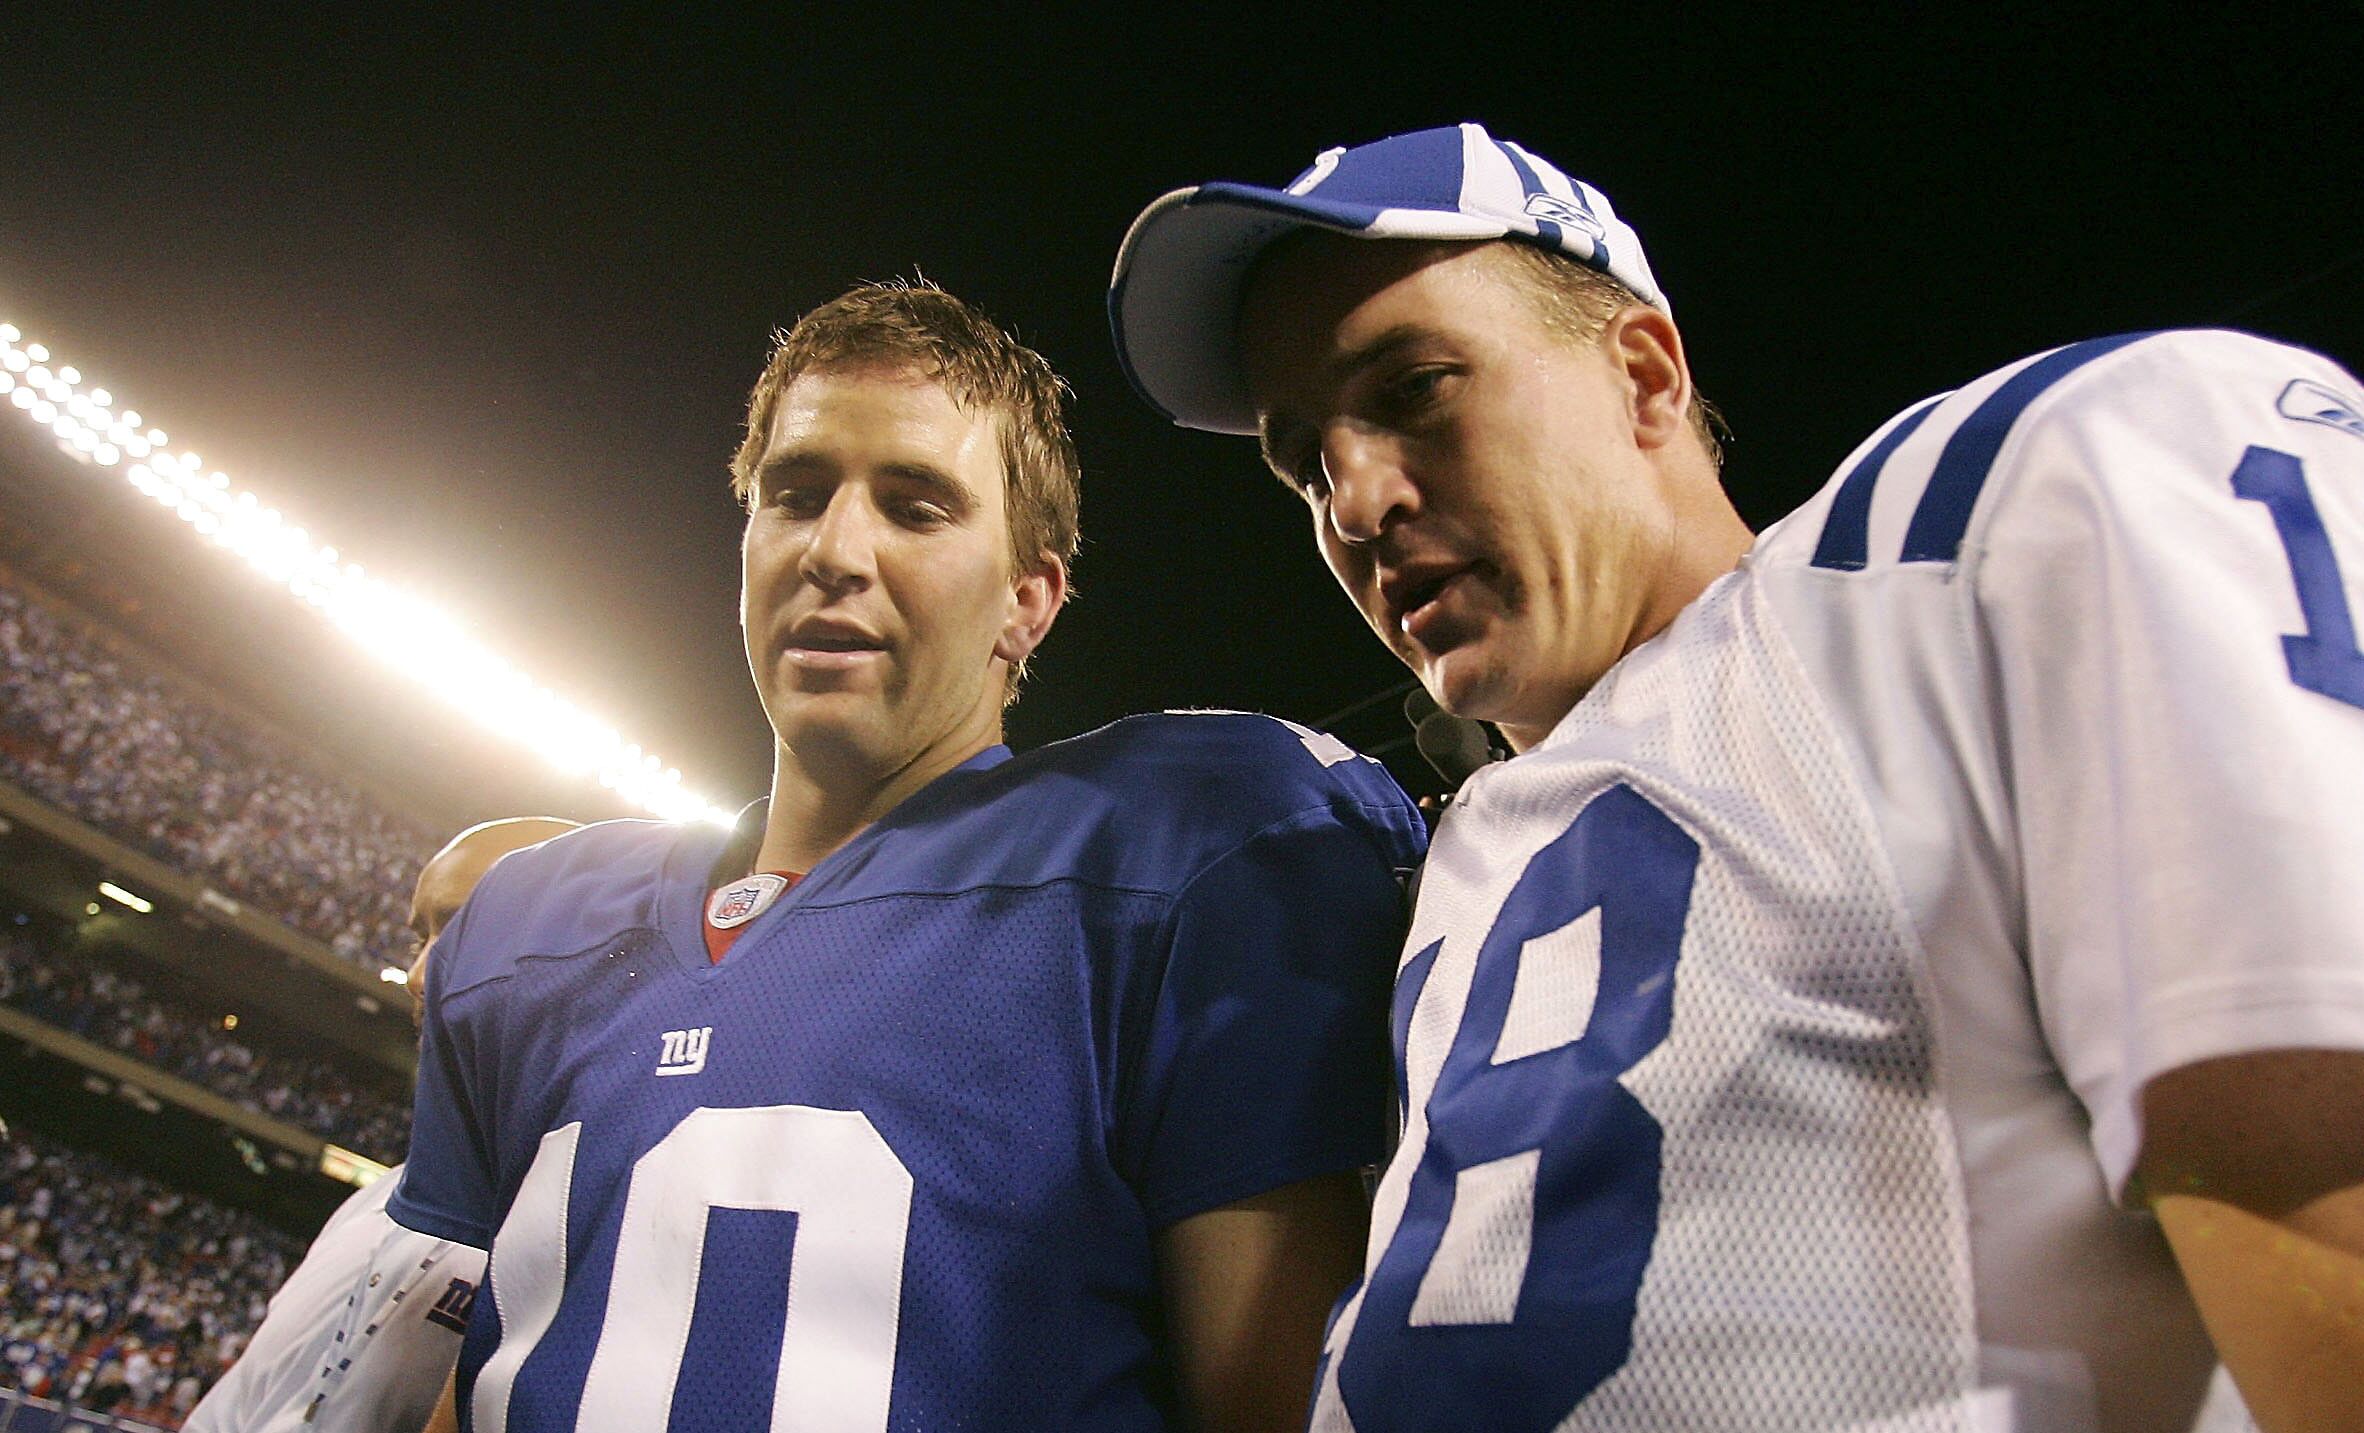 ManningCast: The 10 NFL Games Peyton and Eli Manning Will Work for ESPN  This Season - Sports Illustrated